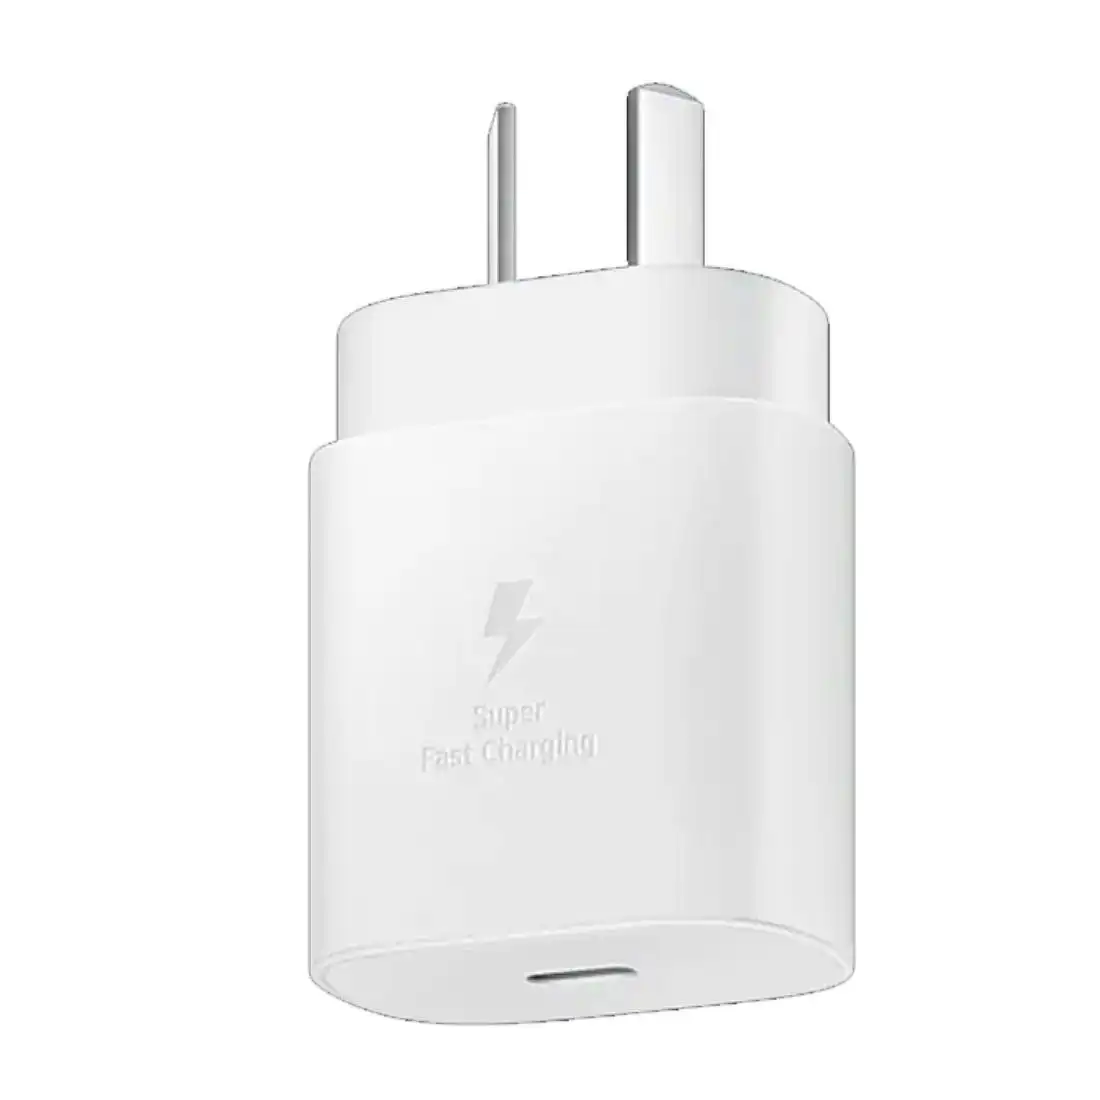 Samsung USB-C Wall Charger for Super Fast Charging 25W EP-TA800NWEGAU - White